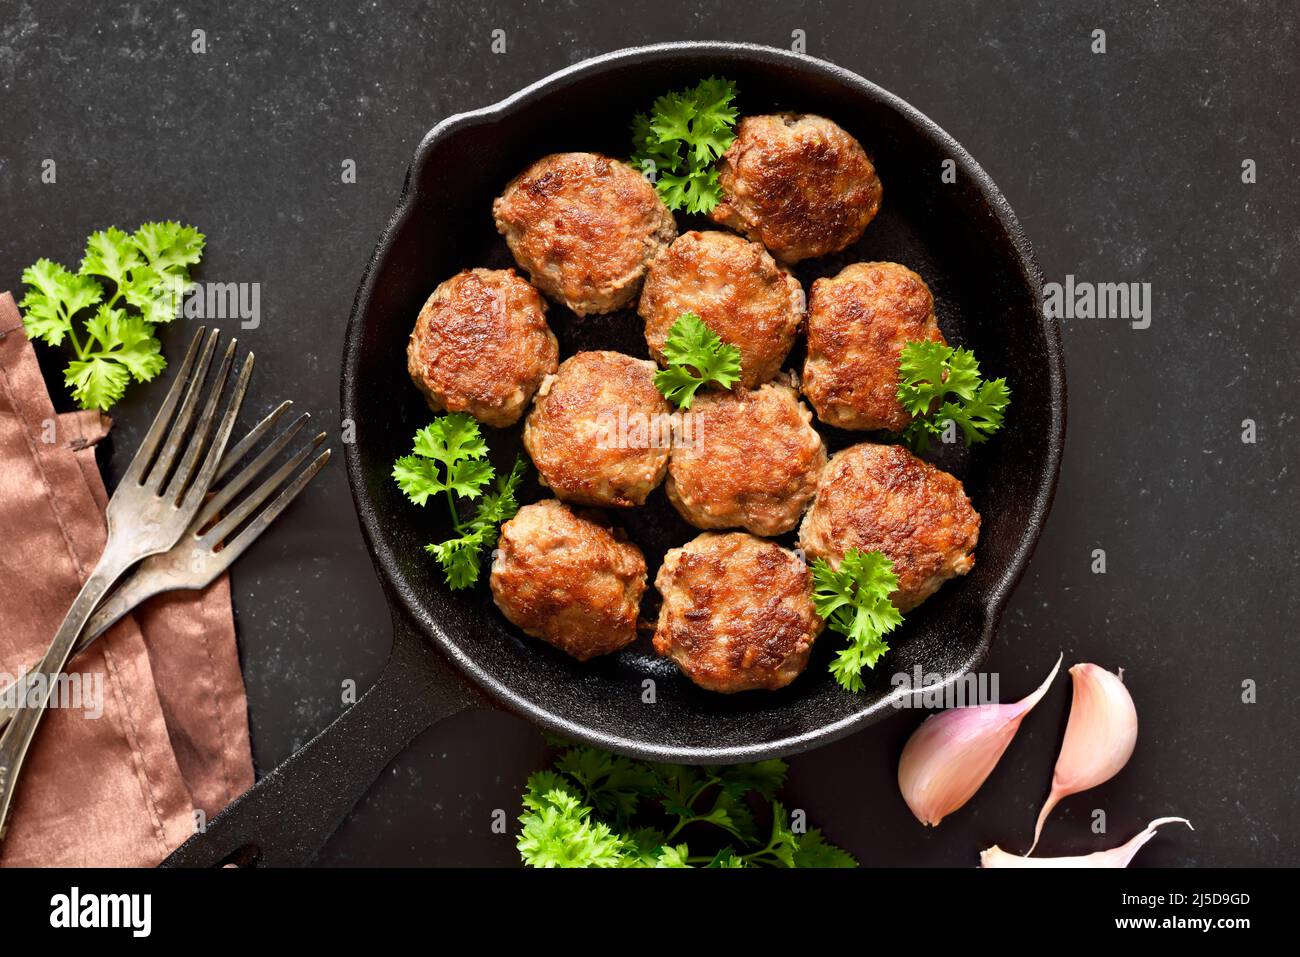 Homemade cutlets from minced meat in frying pan over black background. Top view, flat lay Stock Photo